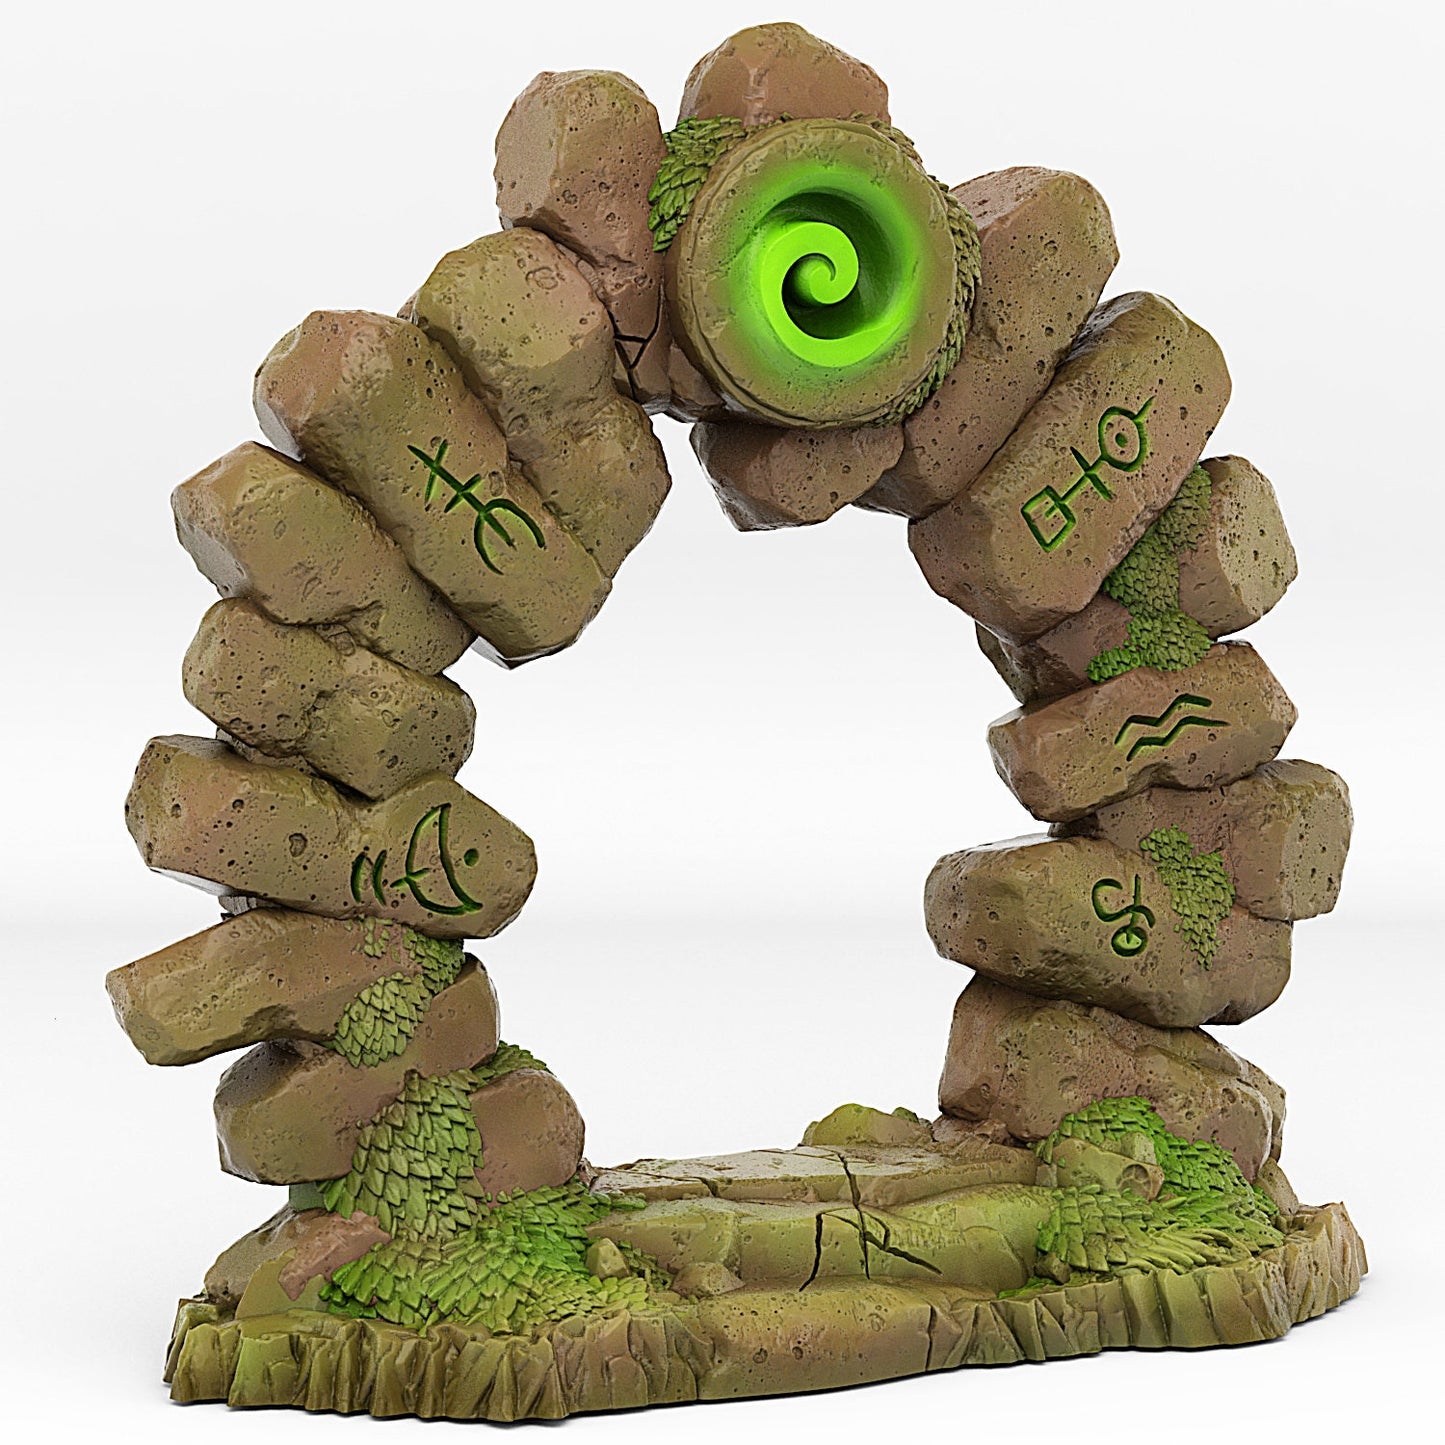 Druid Portal | Scenery and terrain | 3D Printed Resin Miniature | Tabletop Role Playing | AoS | D&D | 40K | Pathfinder